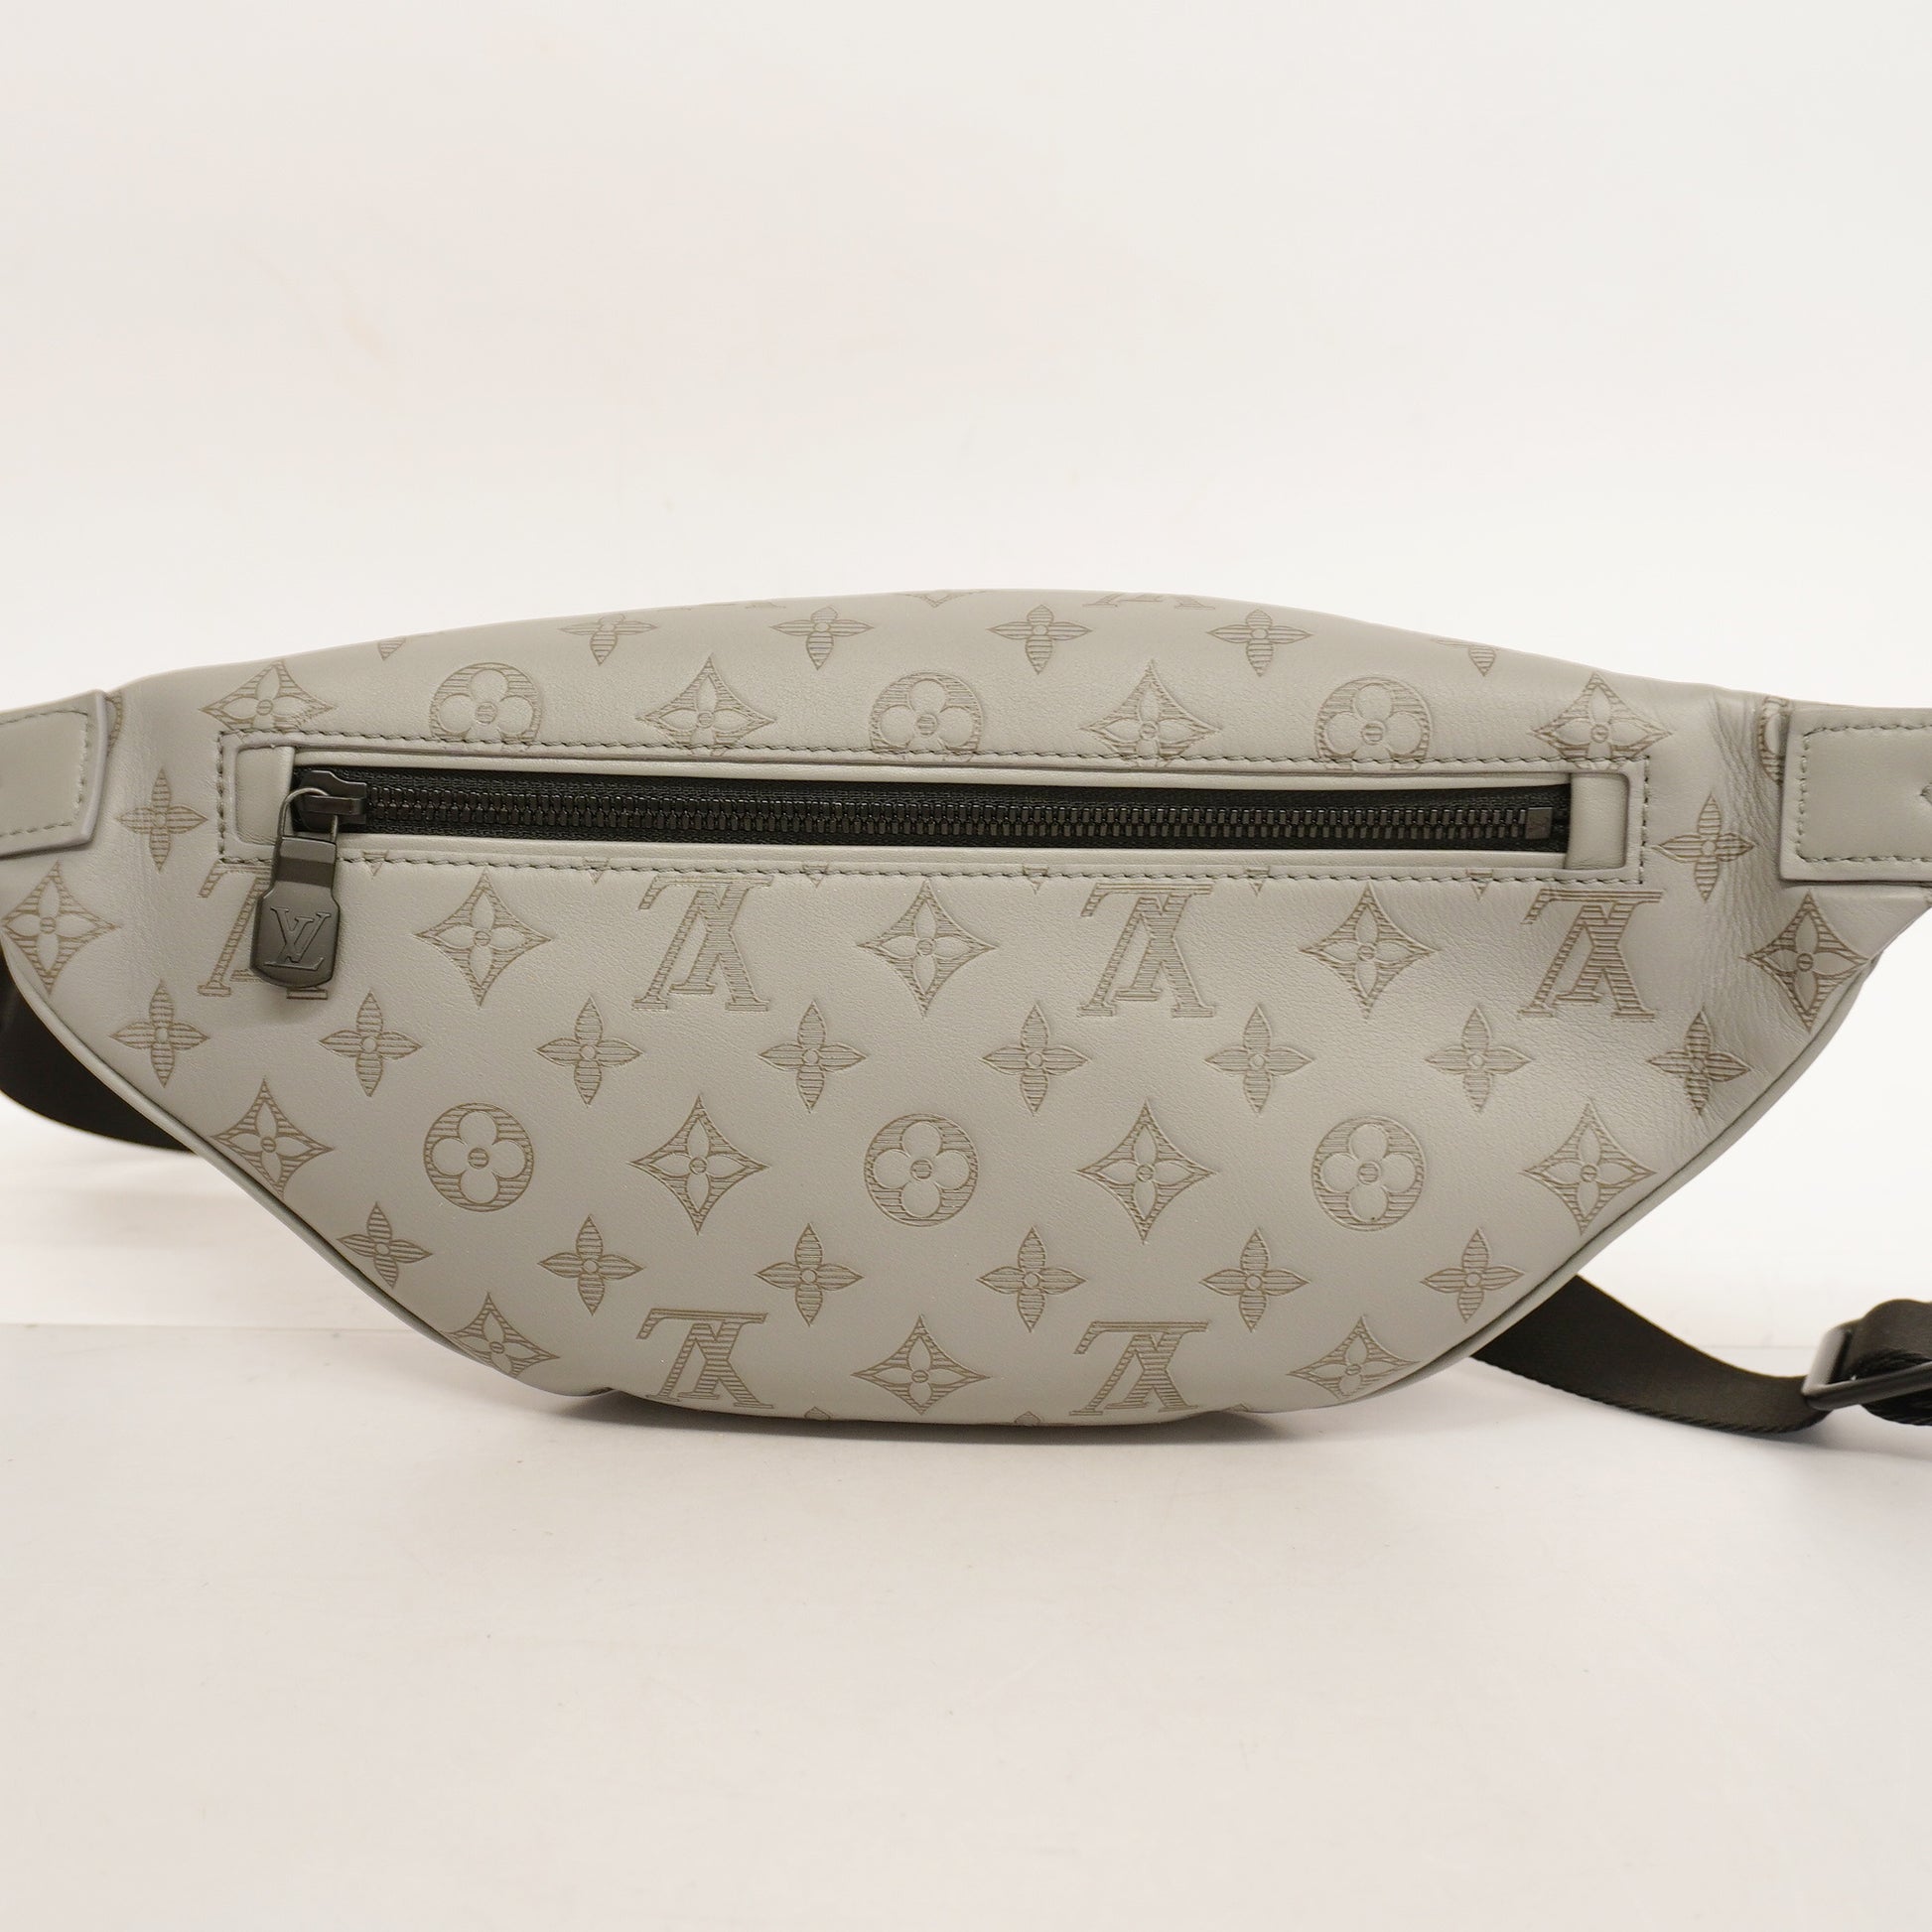 Shop Louis Vuitton Discovery Discovery bumbag pm (M46036, M46108